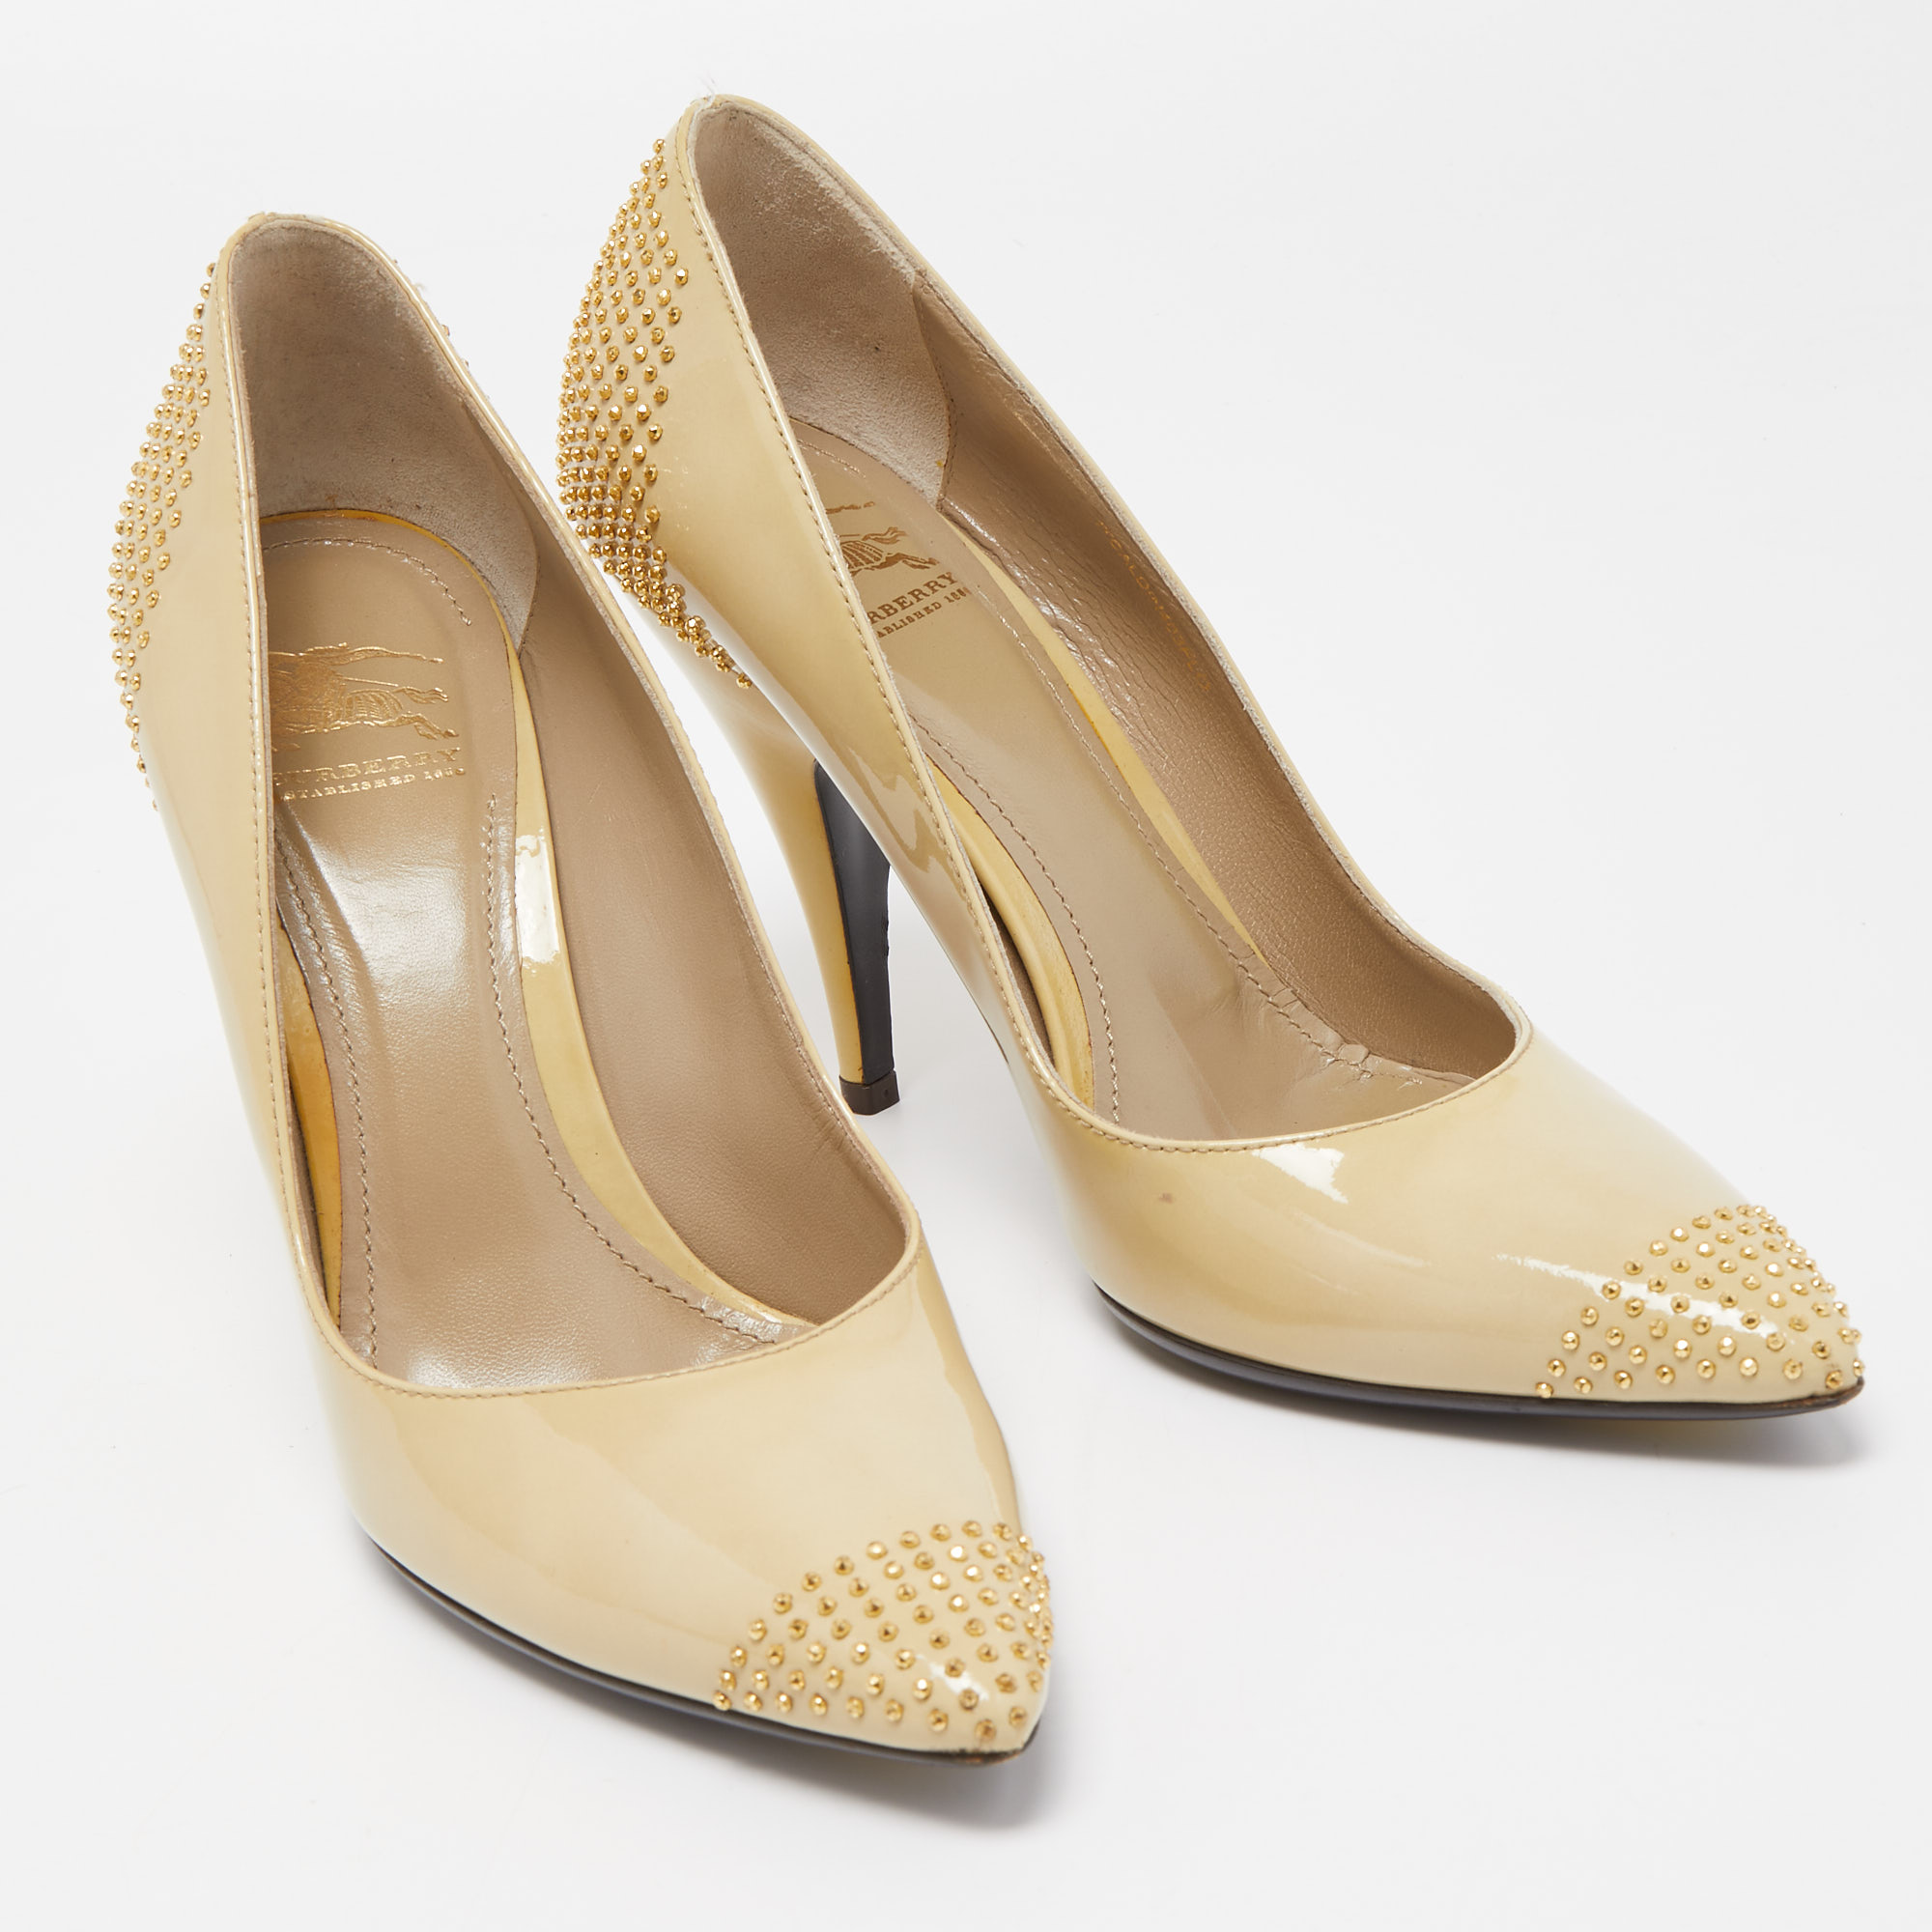 Burberry Beige Patent Leather Studded Pointed Toe Pumps Size 38